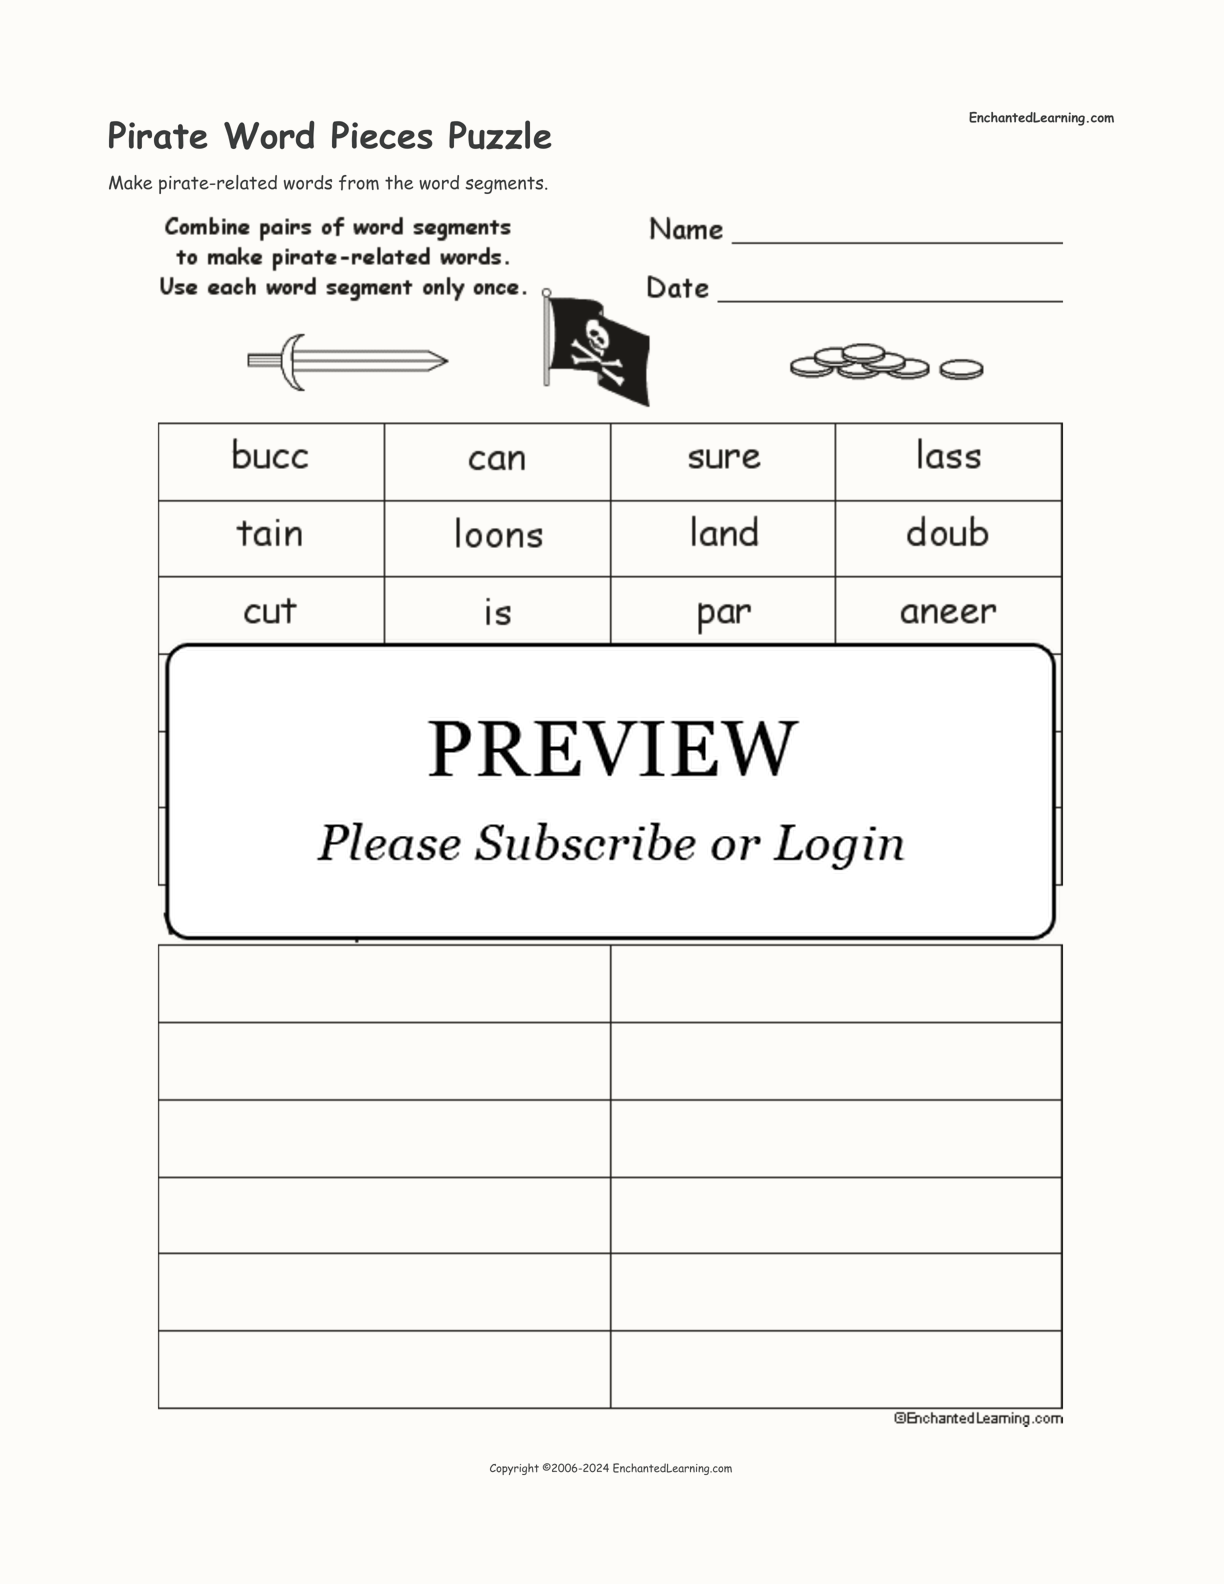 Pirate Word Pieces Puzzle interactive worksheet page 1